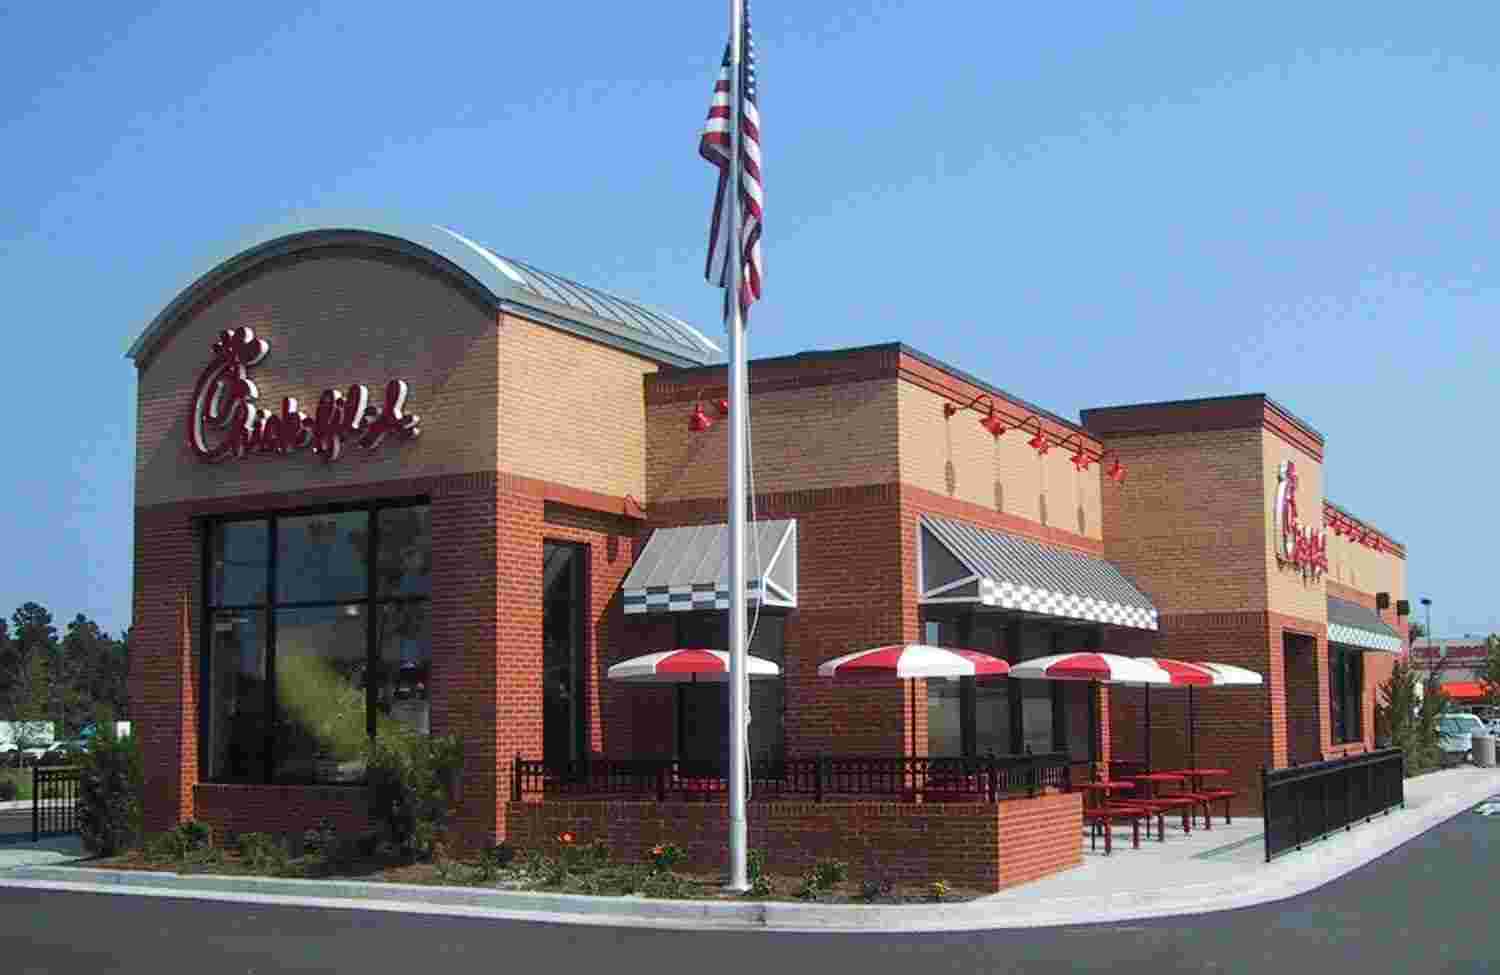 Construction of Sulphur Springs Chick-Fil-A Expected to be Completed by March 2019